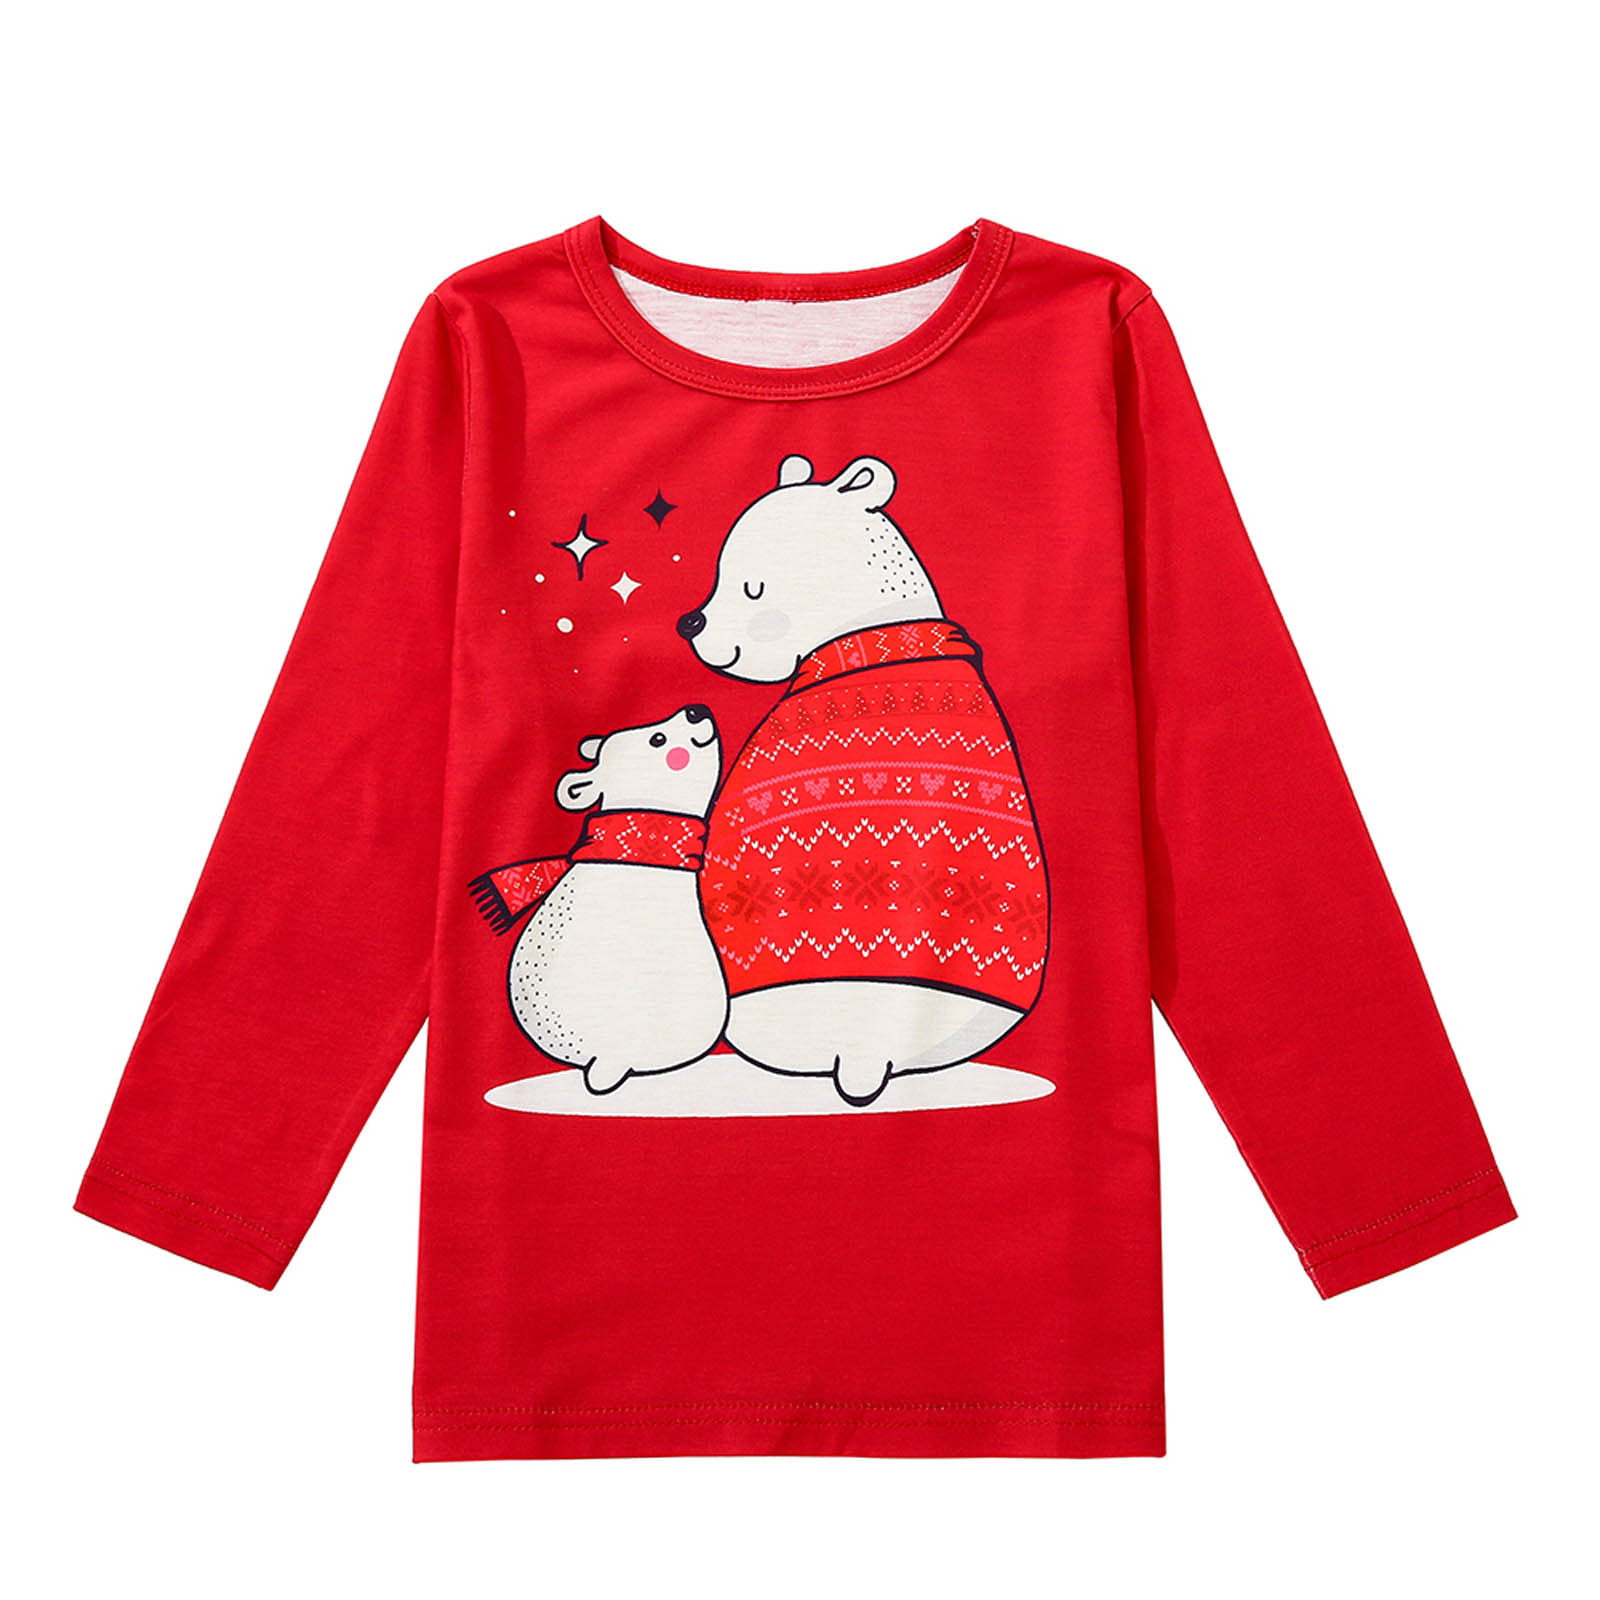  Womens Pajamas Matching Sets Christmas Matching crop top under  10 dollars womens clothes sale prime today clearance skeleton pajama  teacher deals prime cute cheap stuff under 5 dollars customer : Clothing